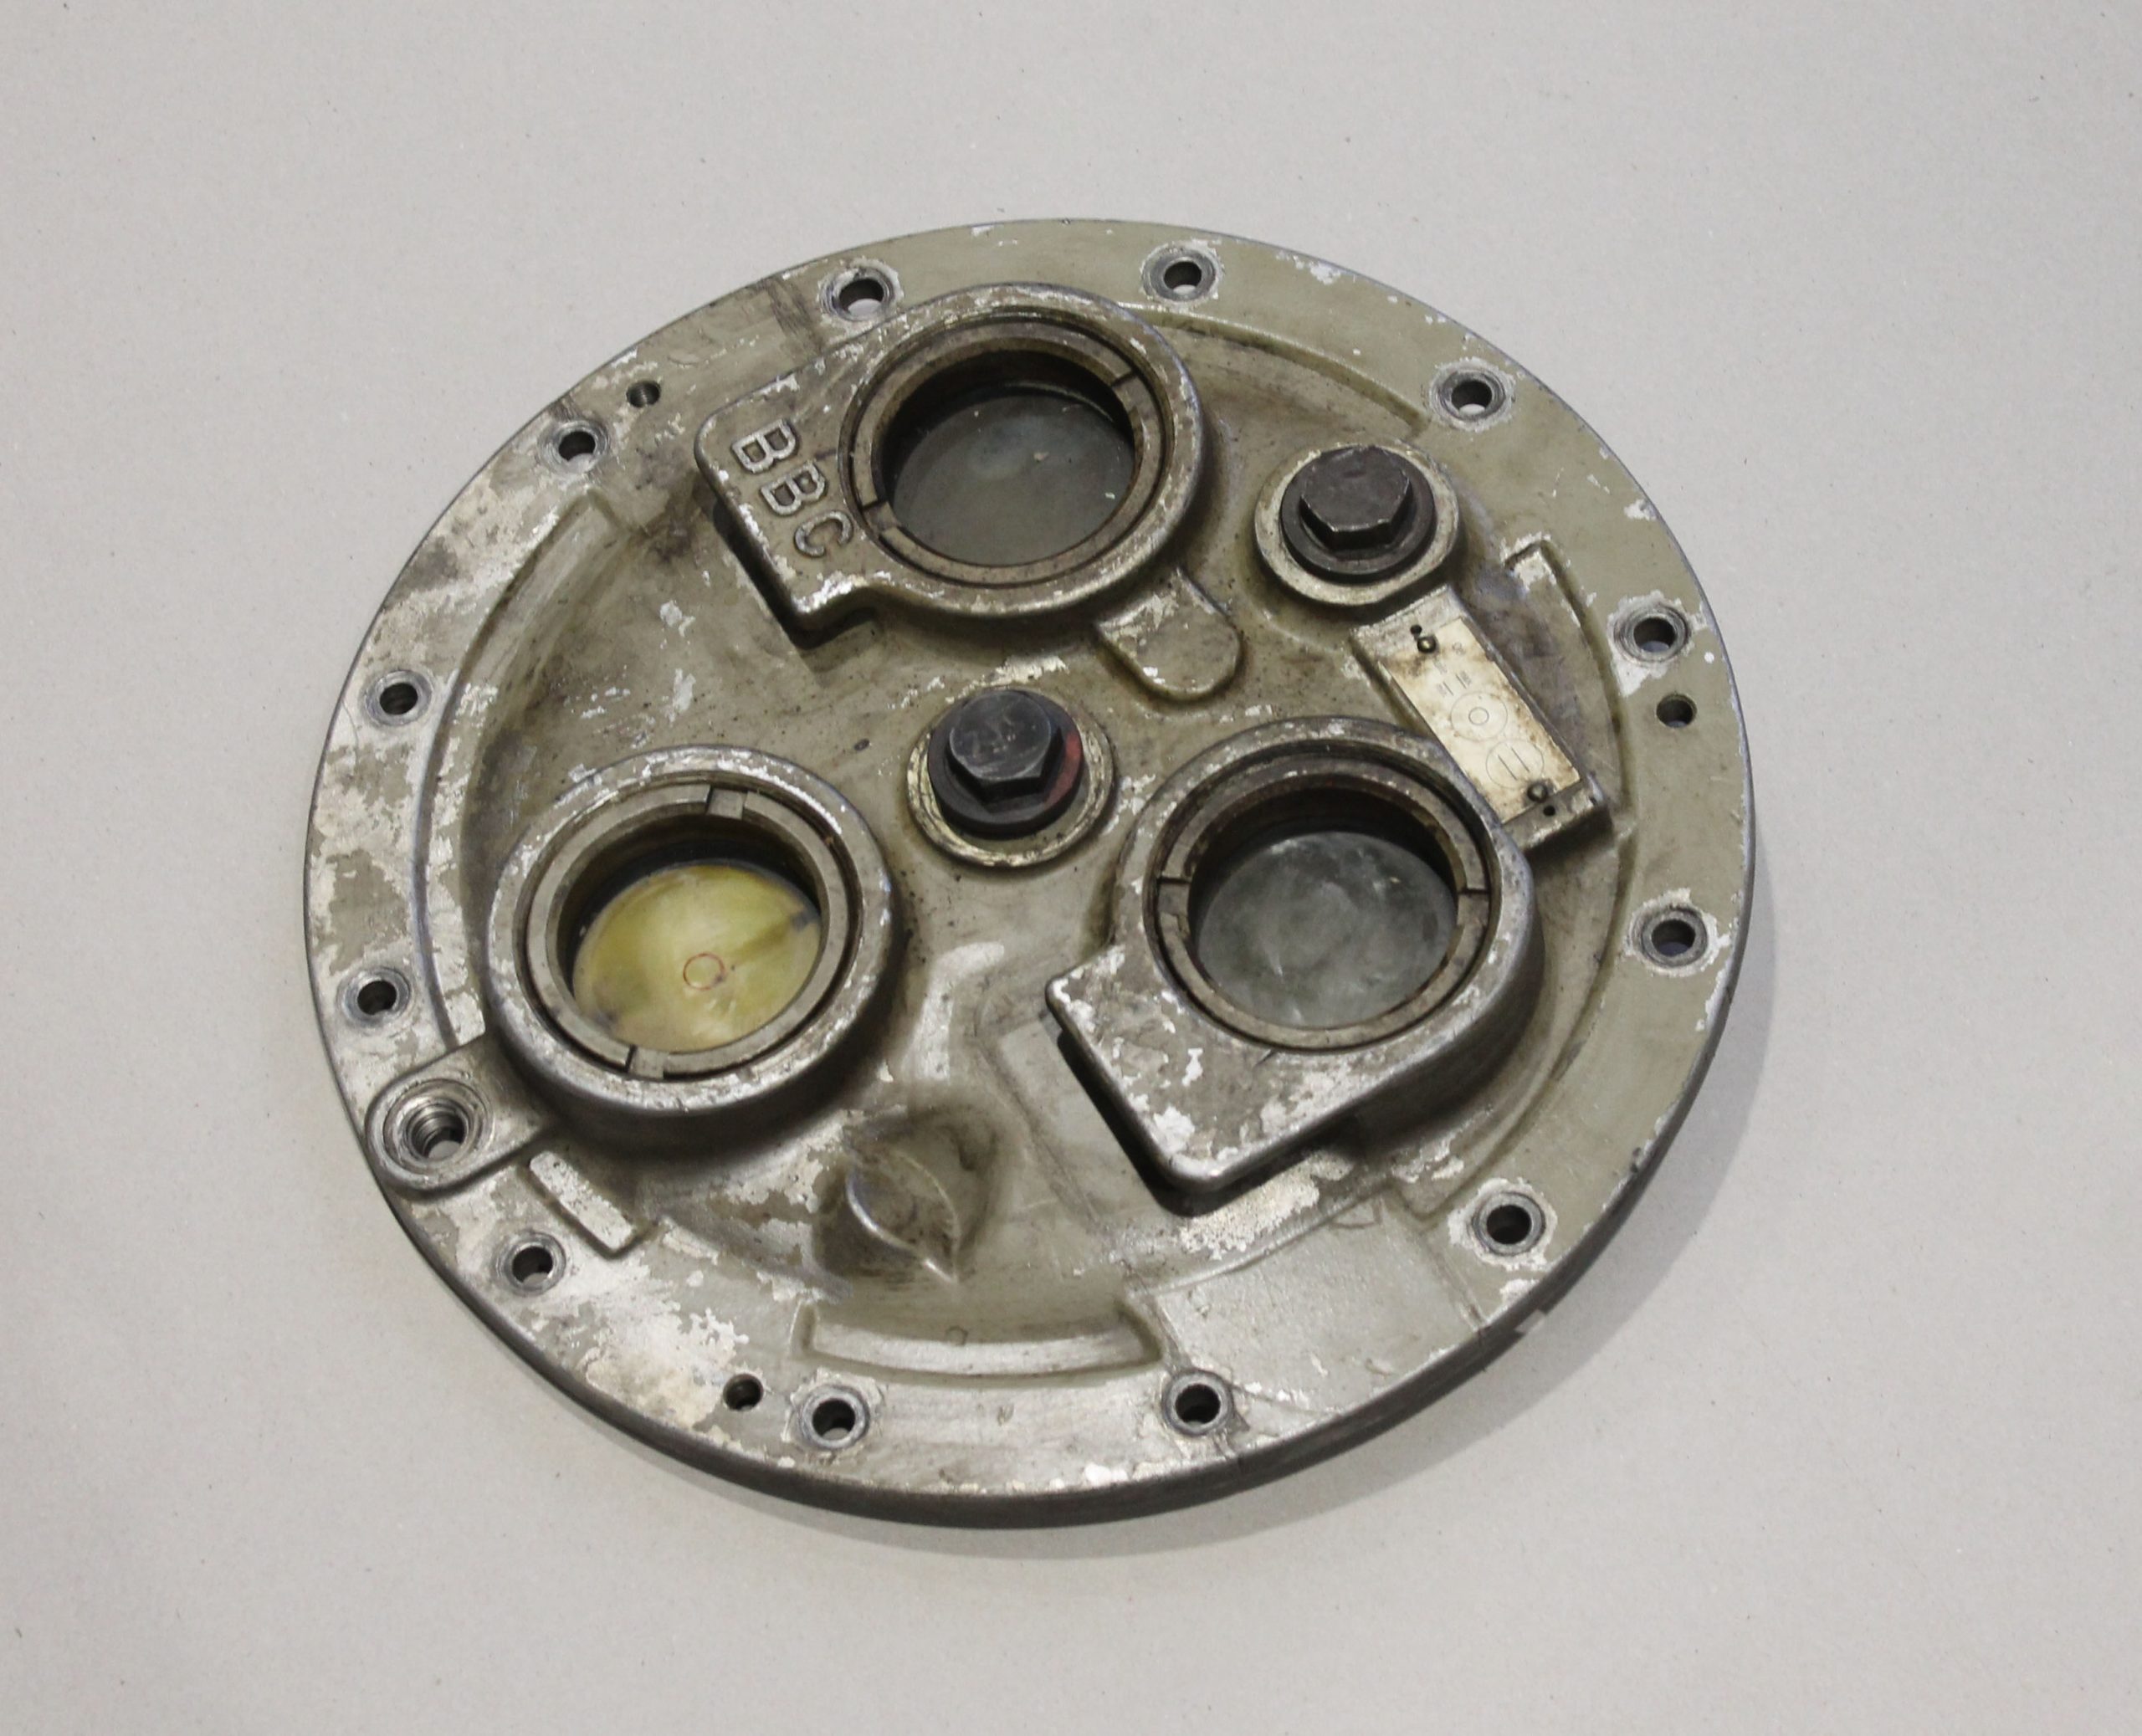 R400 Bearing space cover